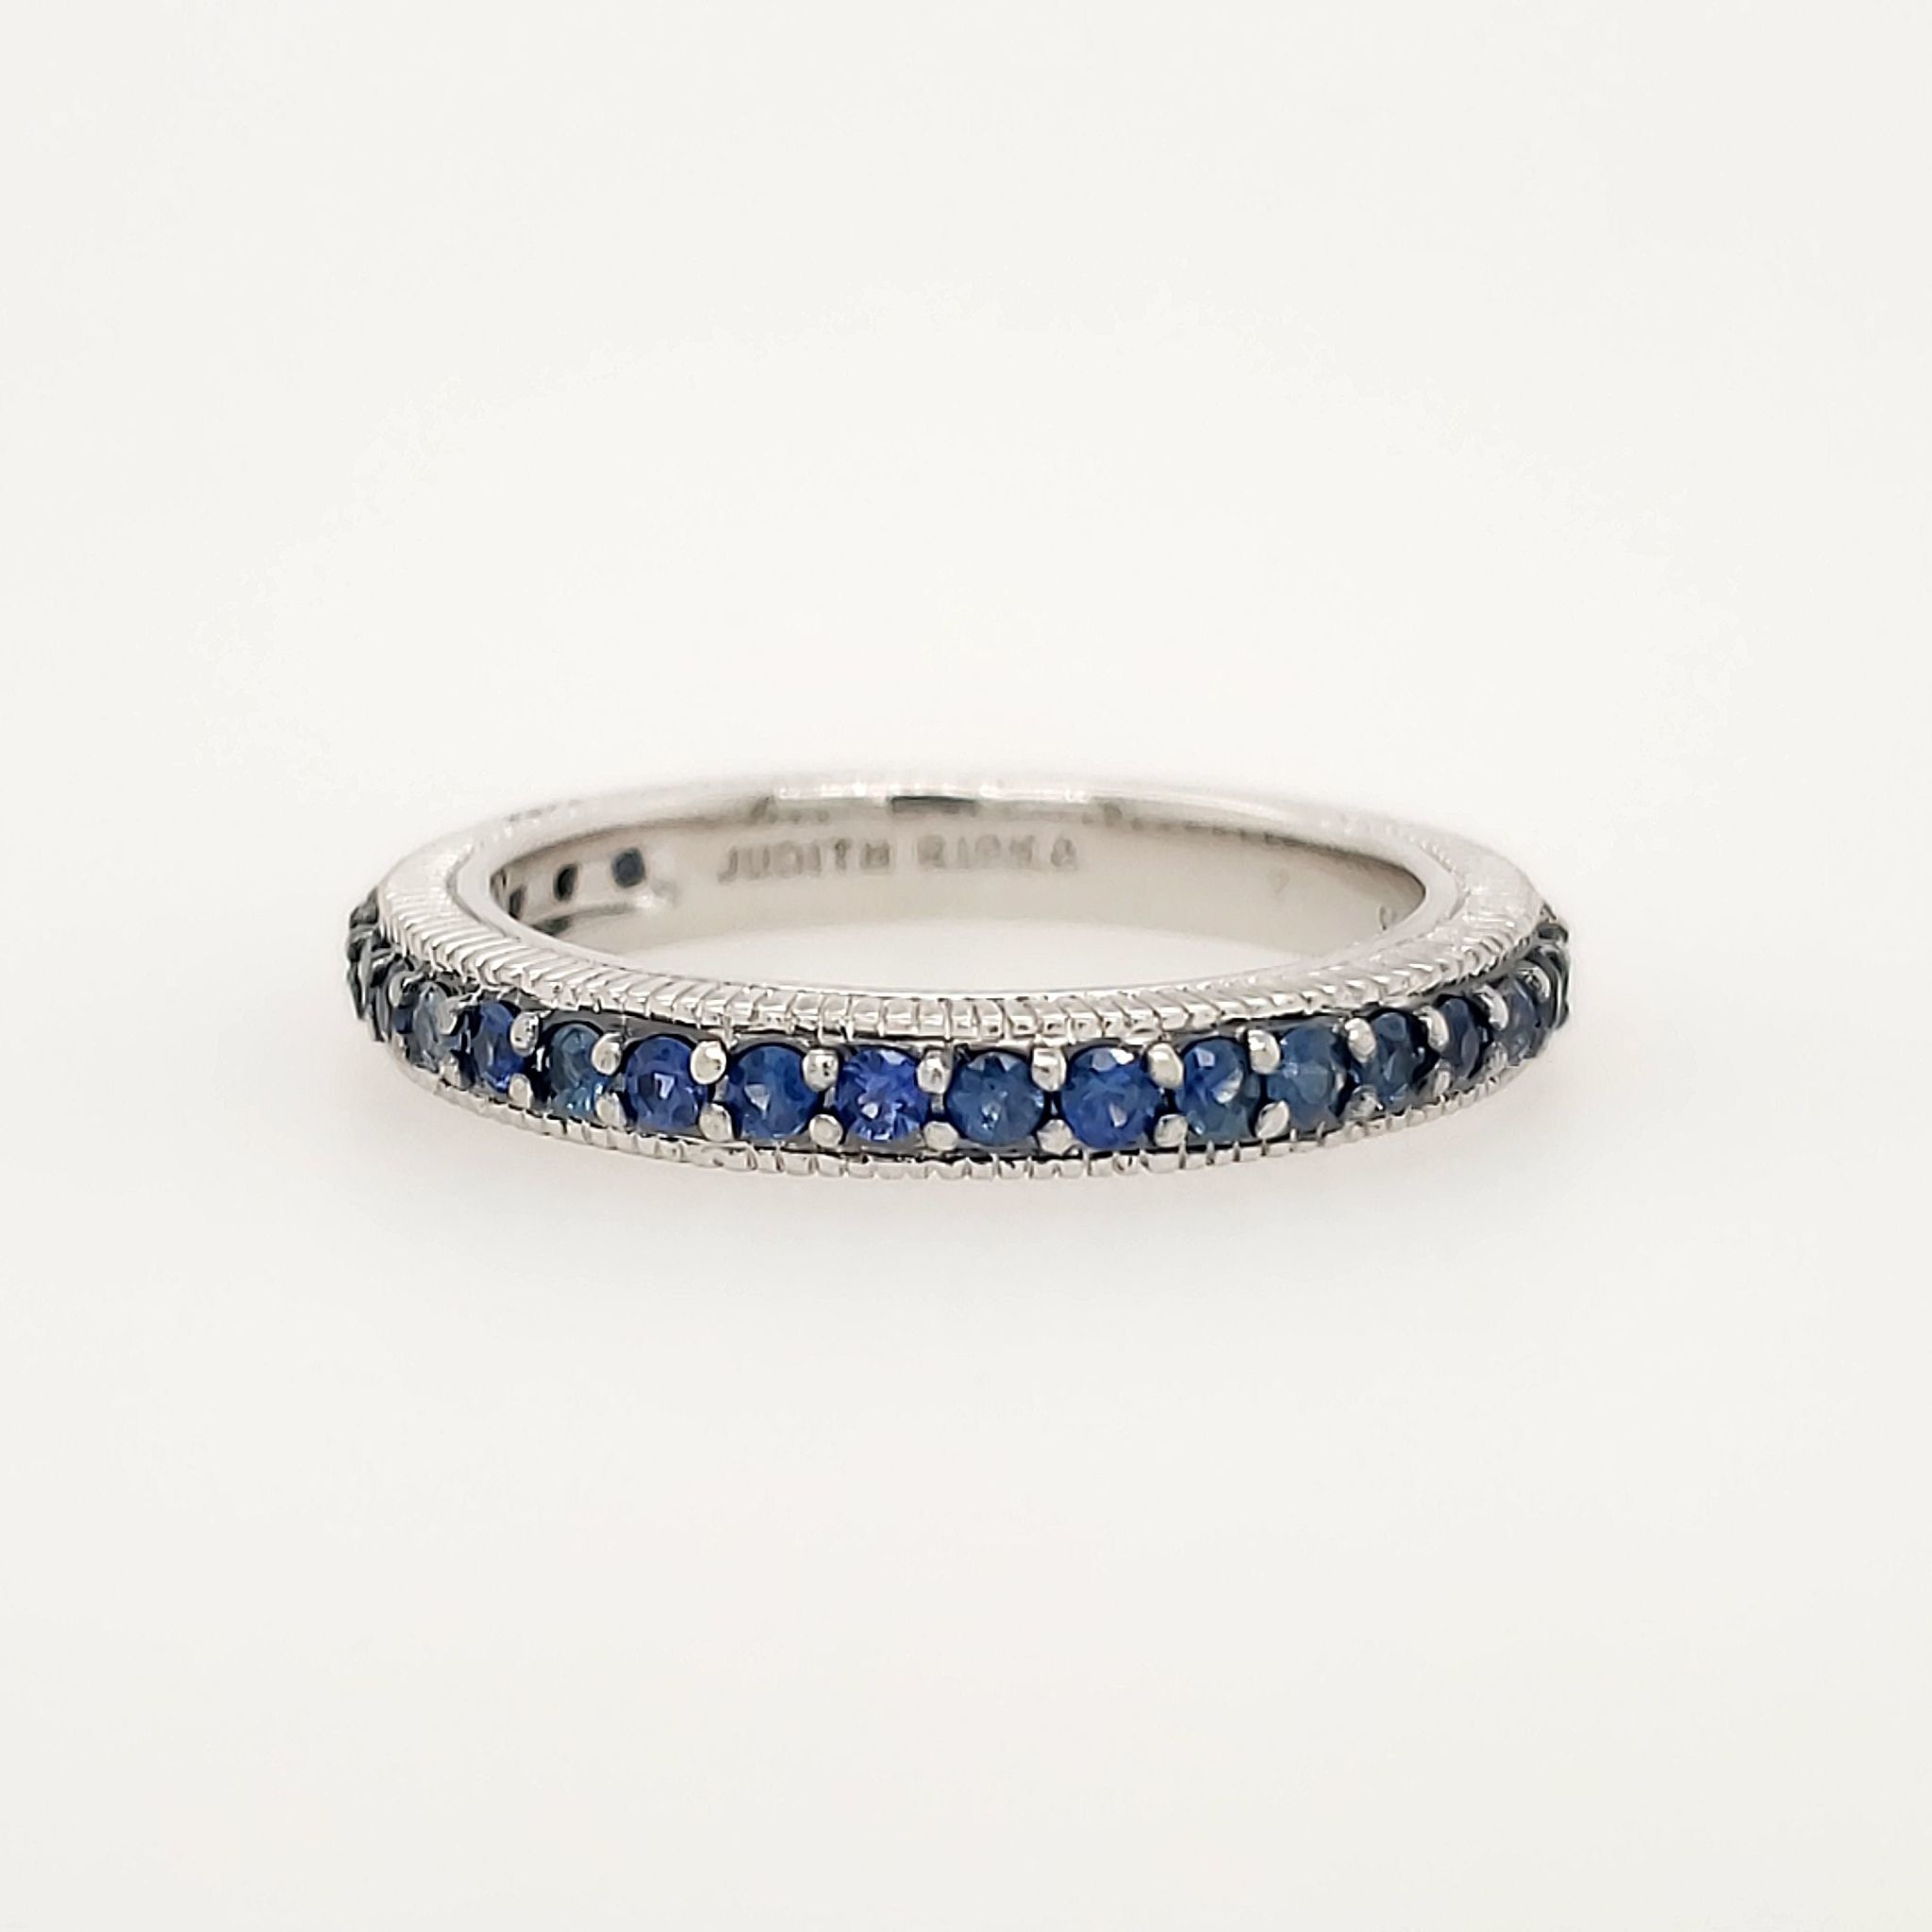 80059 STERLING SILVER JUDITH RIPKA CUBIC ZIRCONIA BLUE ETERNITY WITH SIZING BAR RING